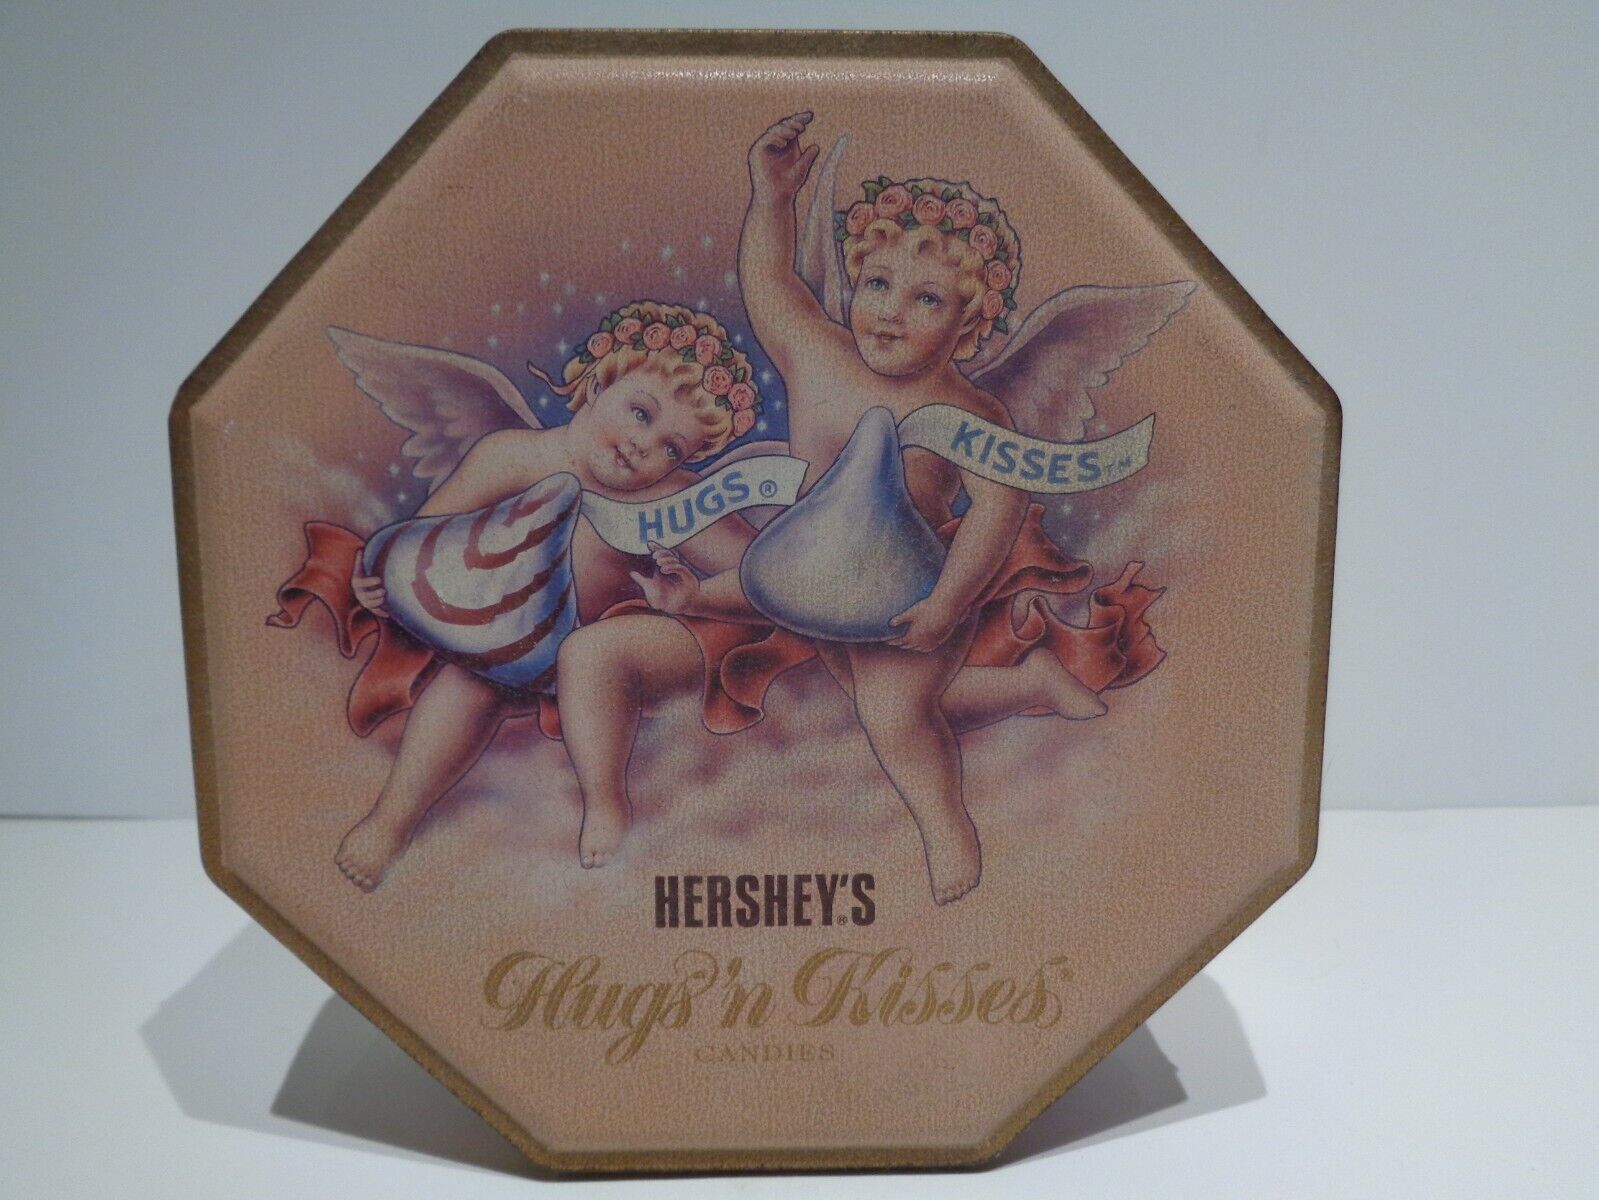 Primary image for Hershey's Hugs & Kisses candies tin W/Cherubs On Lid Octagon